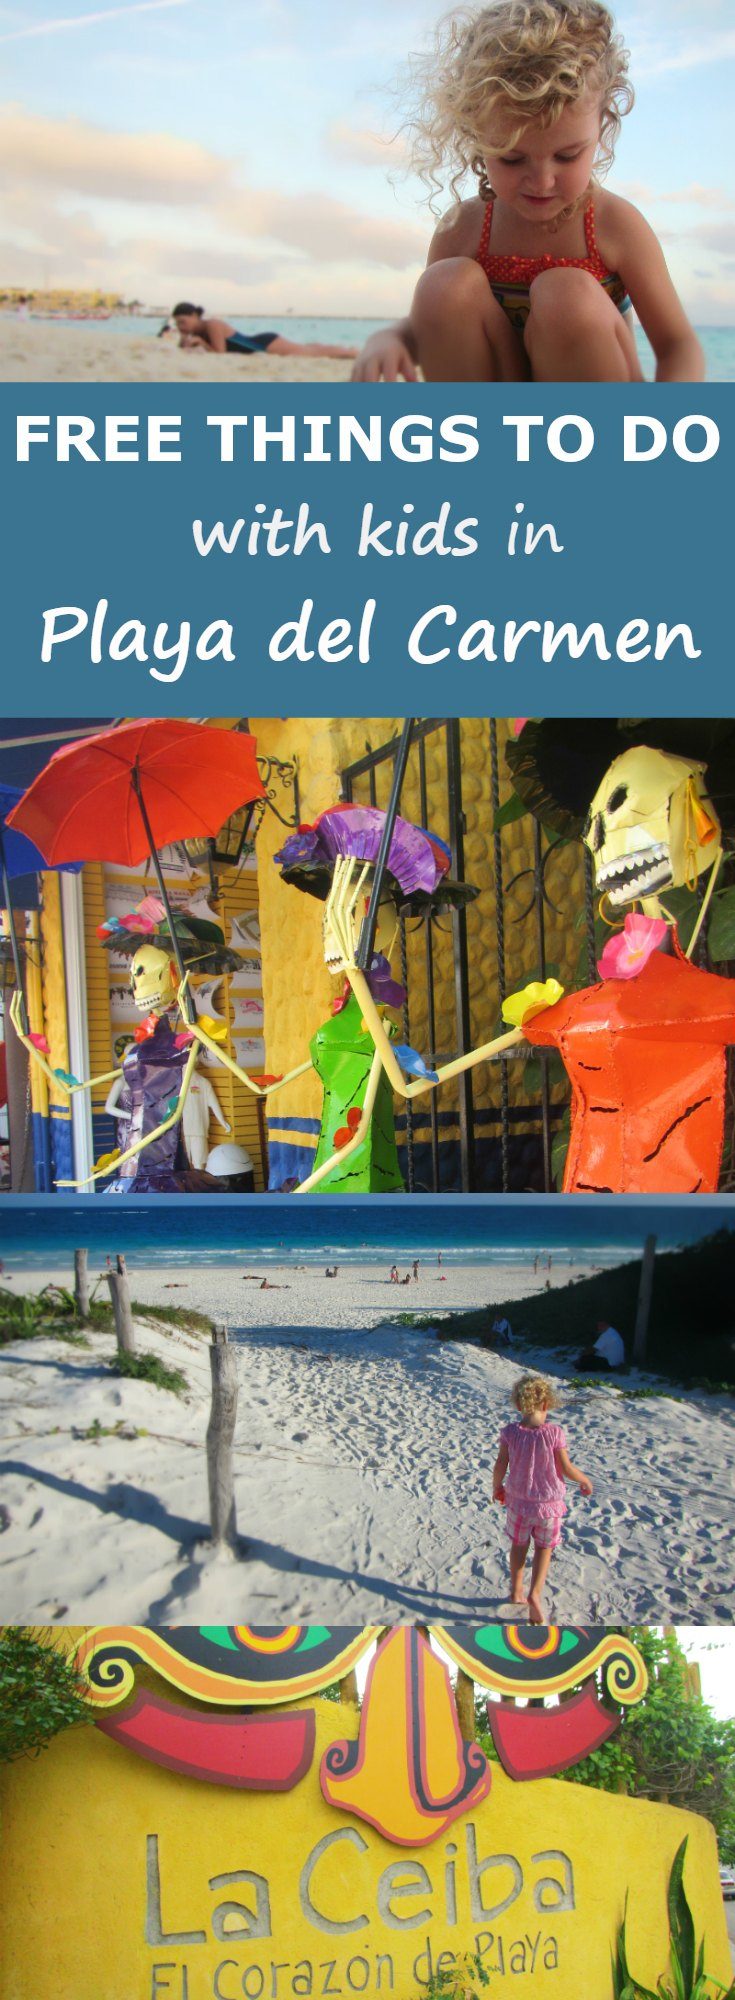 Free Things to Do with Kids in Playa del Carmen Mexico